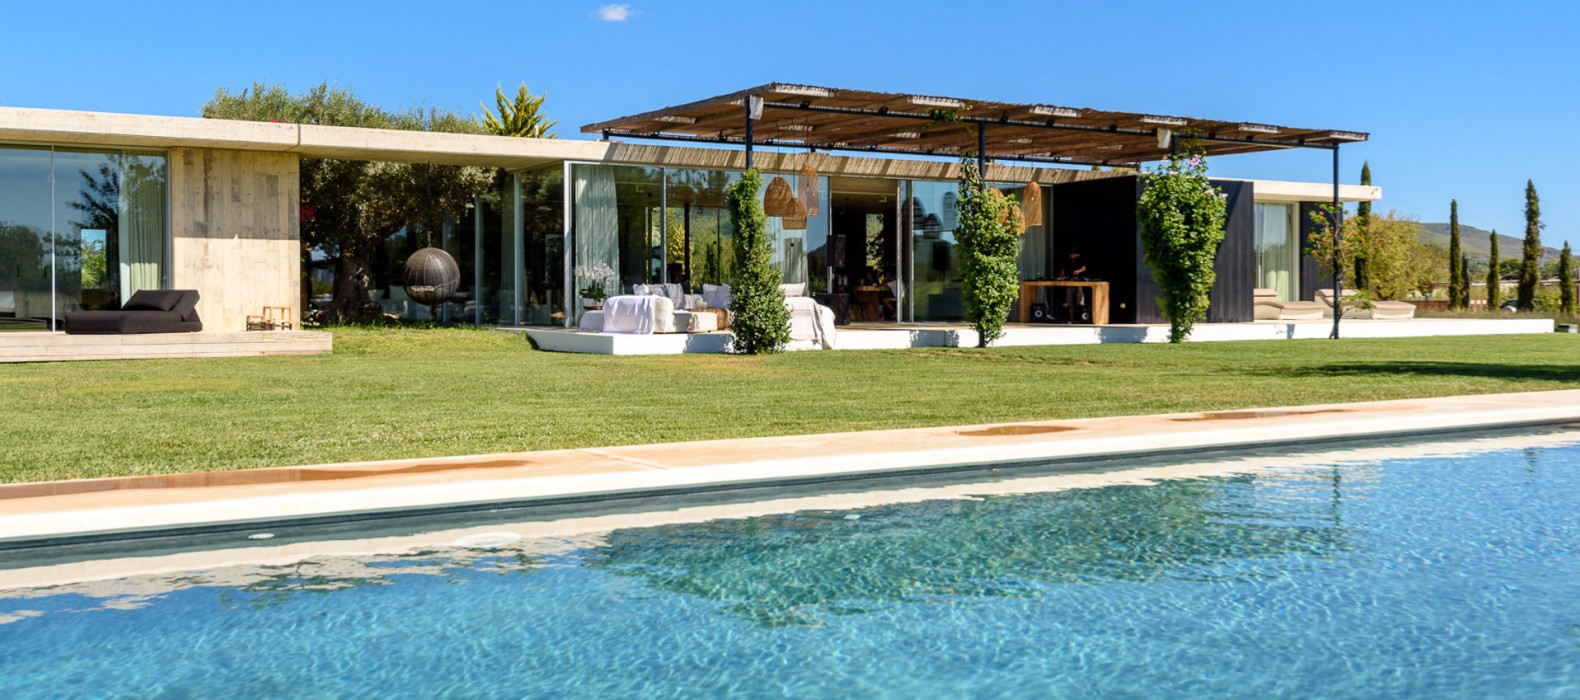 Pool view of Villa Lucerne in Ibiza